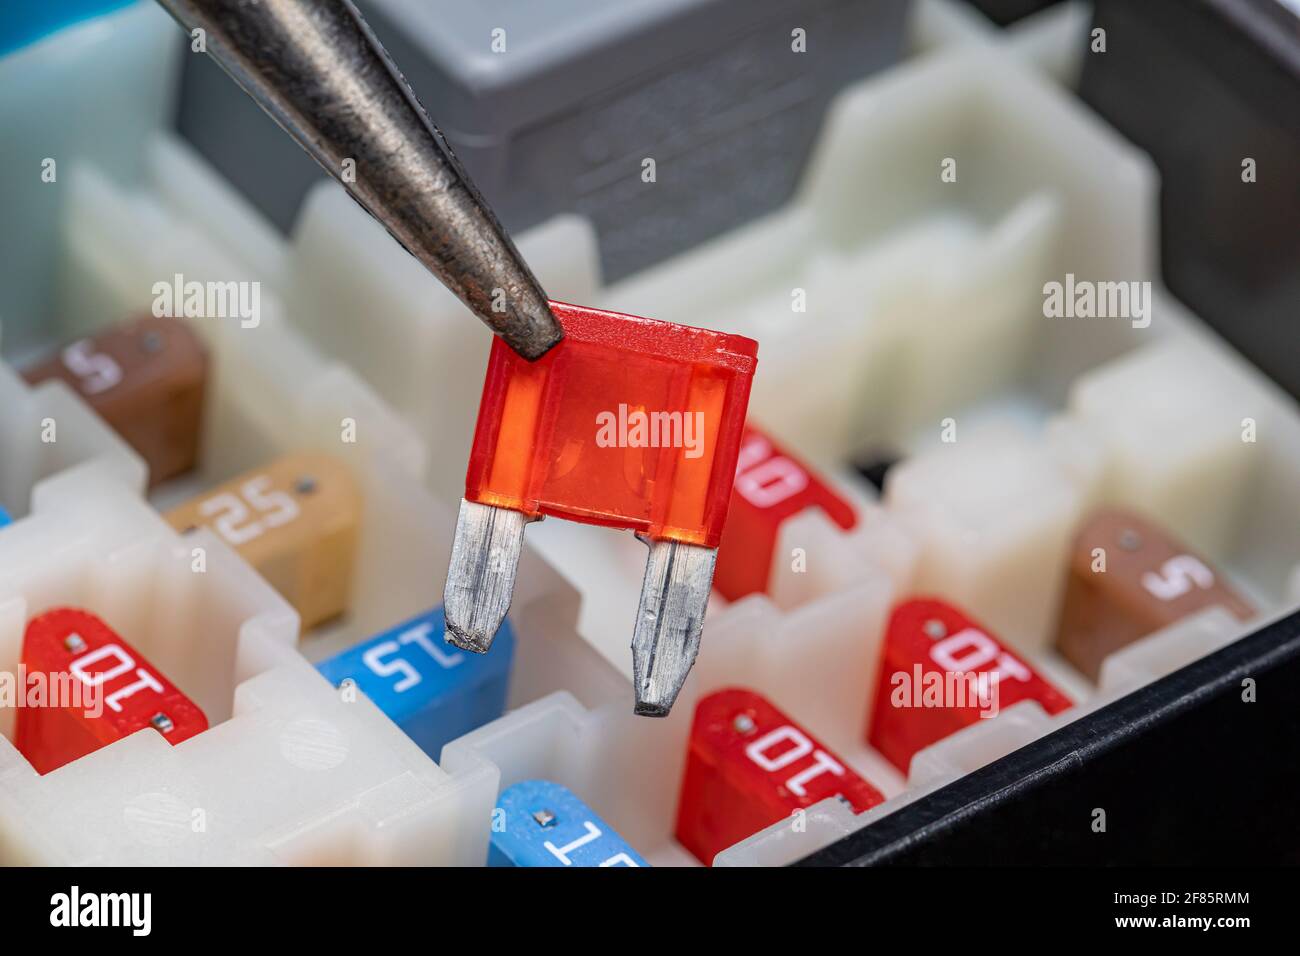 Blown Fuse High Resolution Stock Photography and Images - Alamy